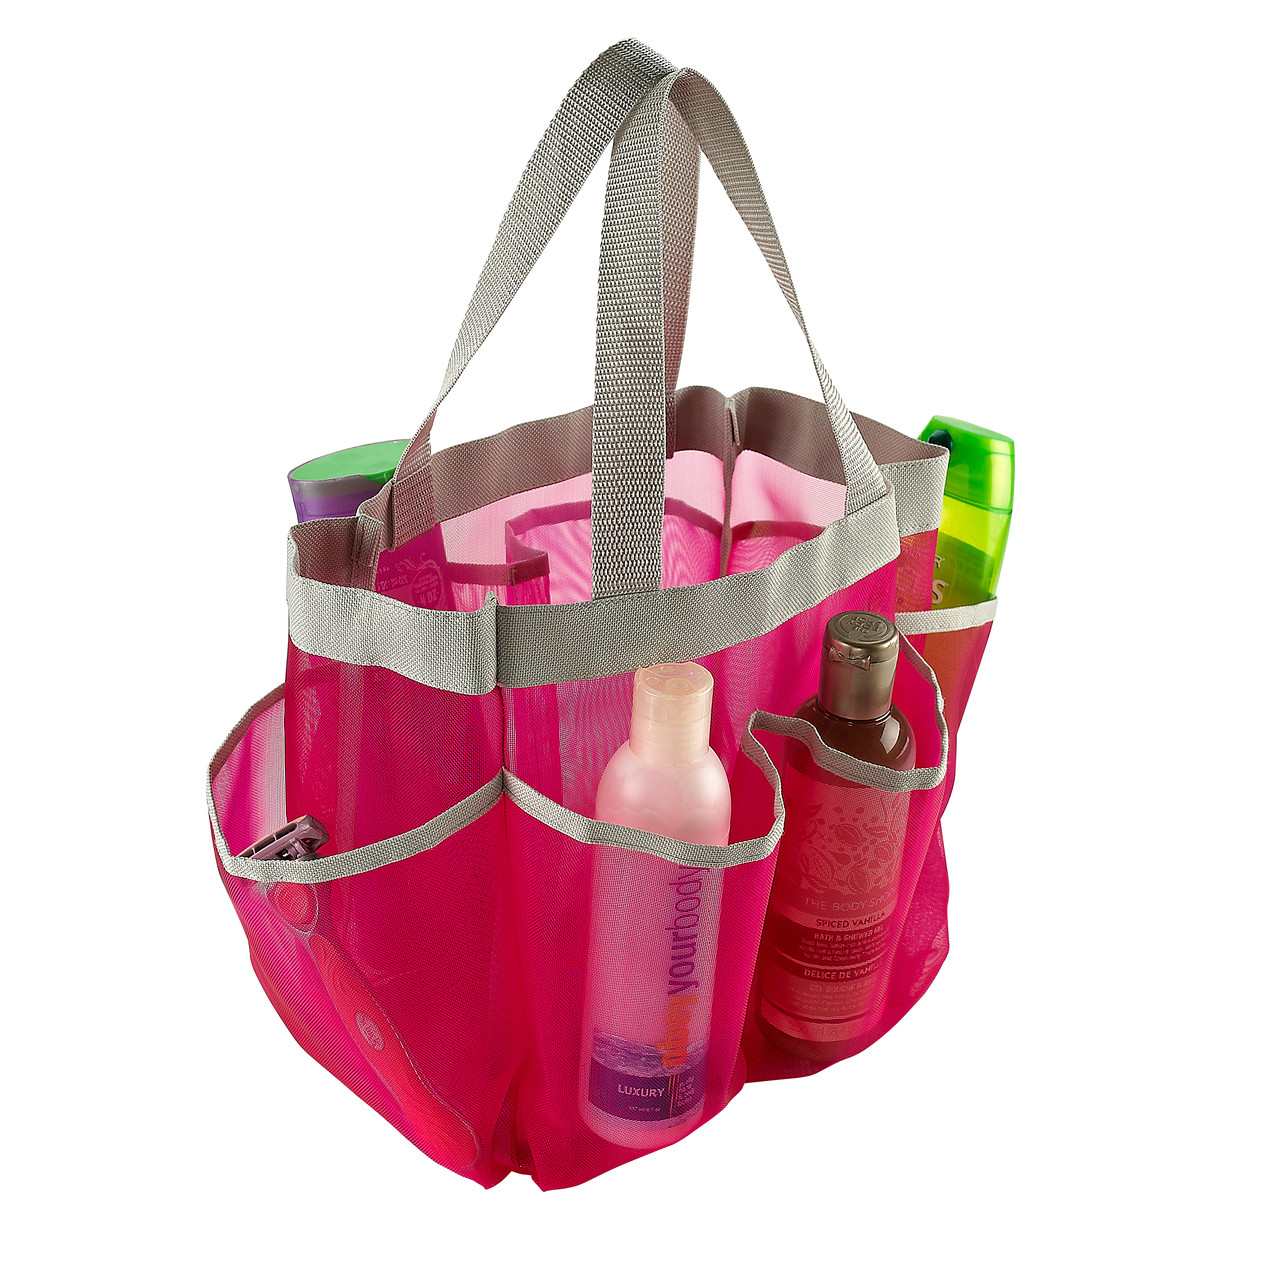 7 Pocket Shower Caddy Tote, Black - Keep Your Shower Essentials Within Easy Reach. Shower Caddies Are Perfect for College Dorms, Gym, Shower, Swimming